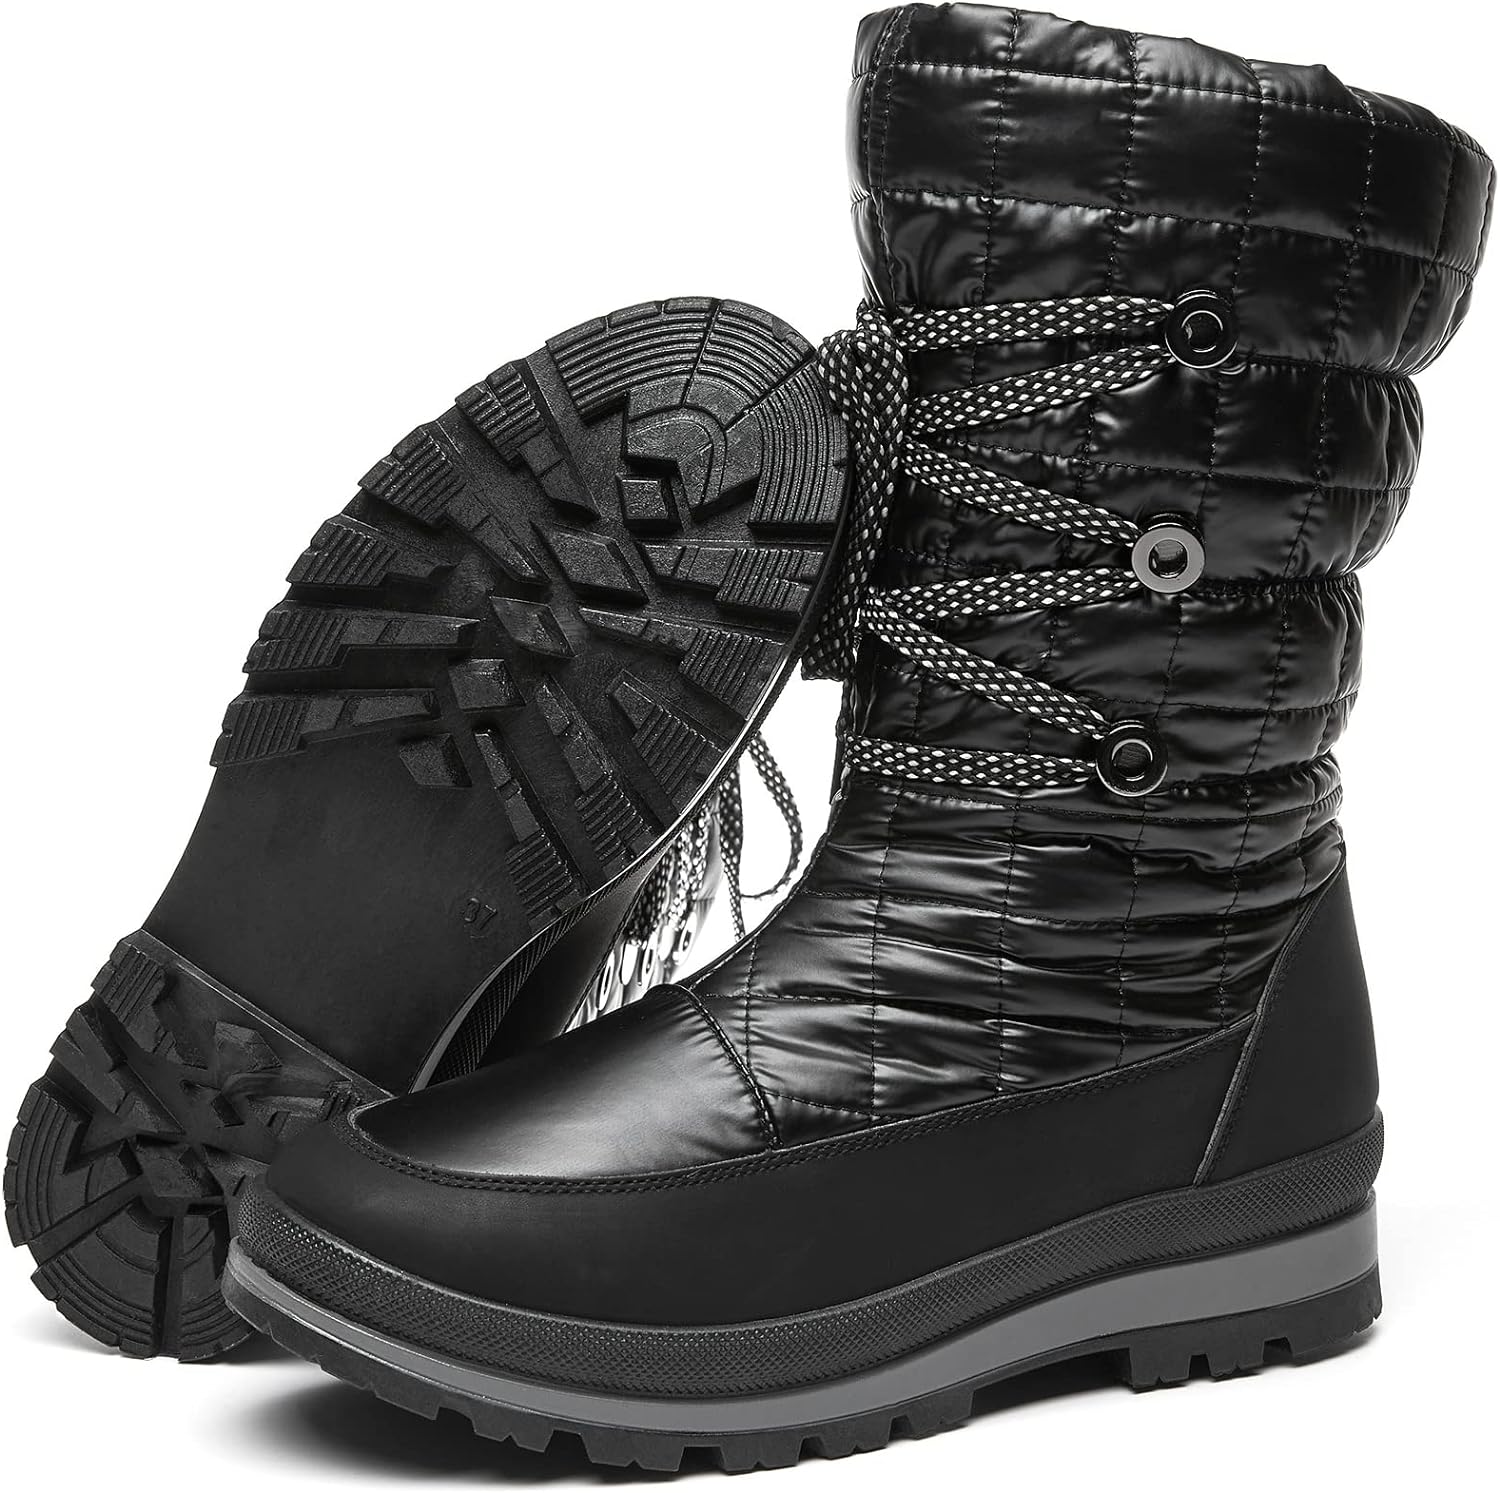 TUOPIN Waterproof Winter Boots for women, Warm Fur Lined Womens Snow Boots, Side Zipper Combat Boots